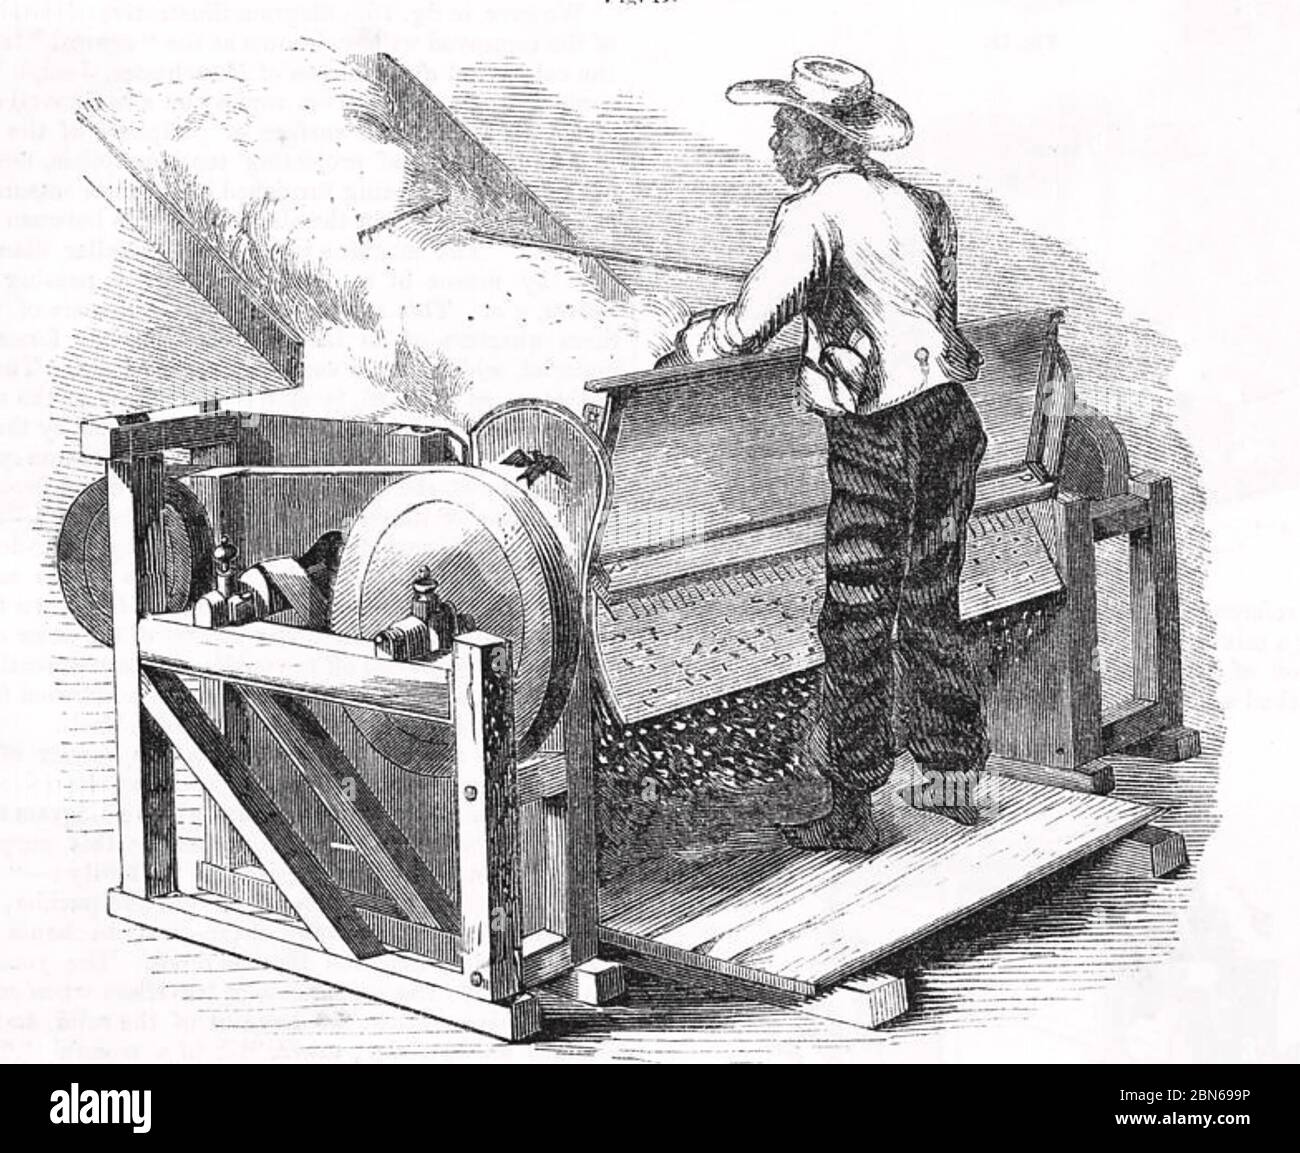 ELI WHITNEY (1765-1825) American inventor of the cotton gin Stock Photo